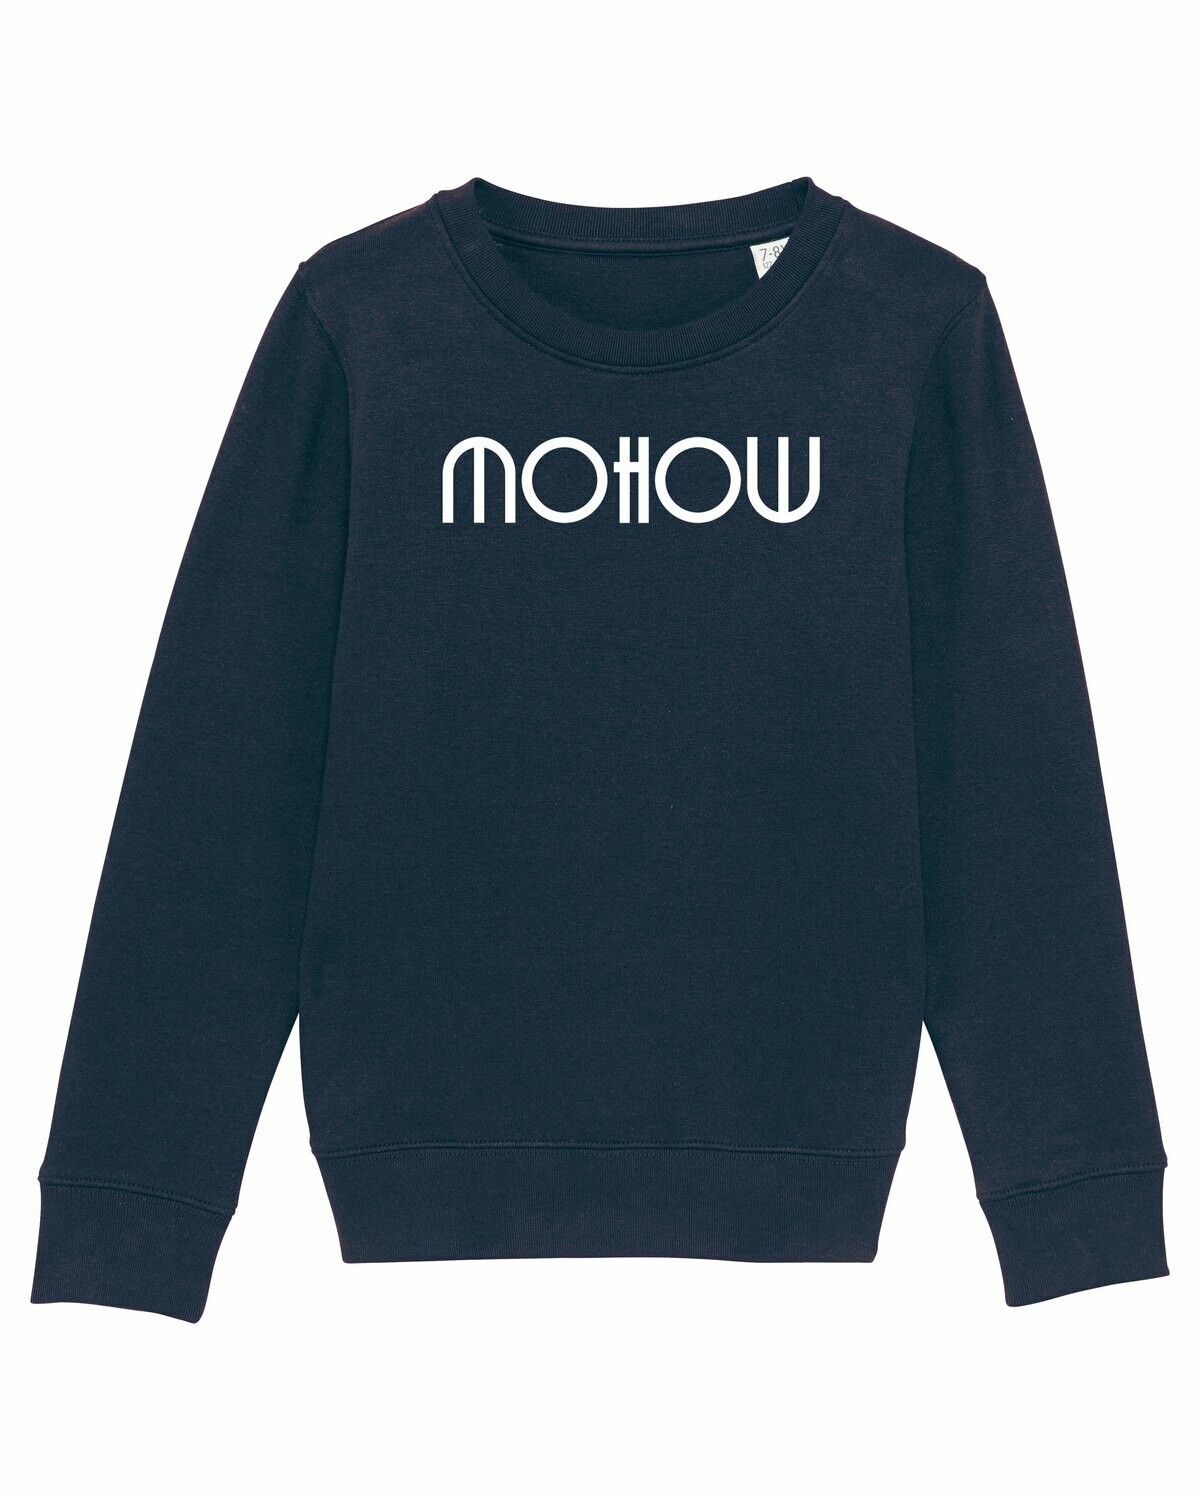 Kids Sweater Mohow